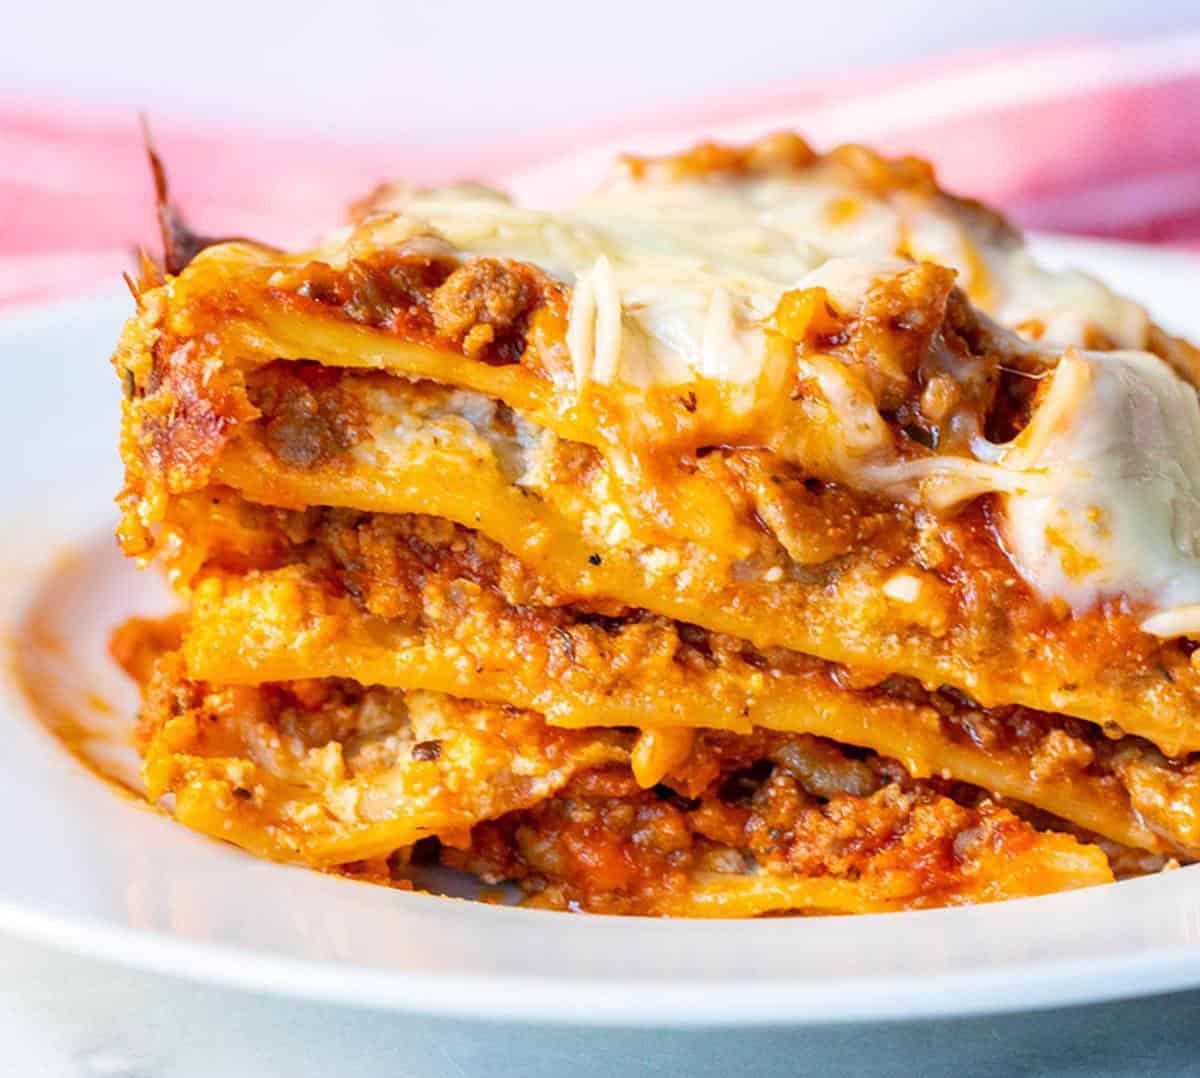  Layers of melted cheese and hearty tomato sauce make this no boil lasagna a crowd-pleaser.